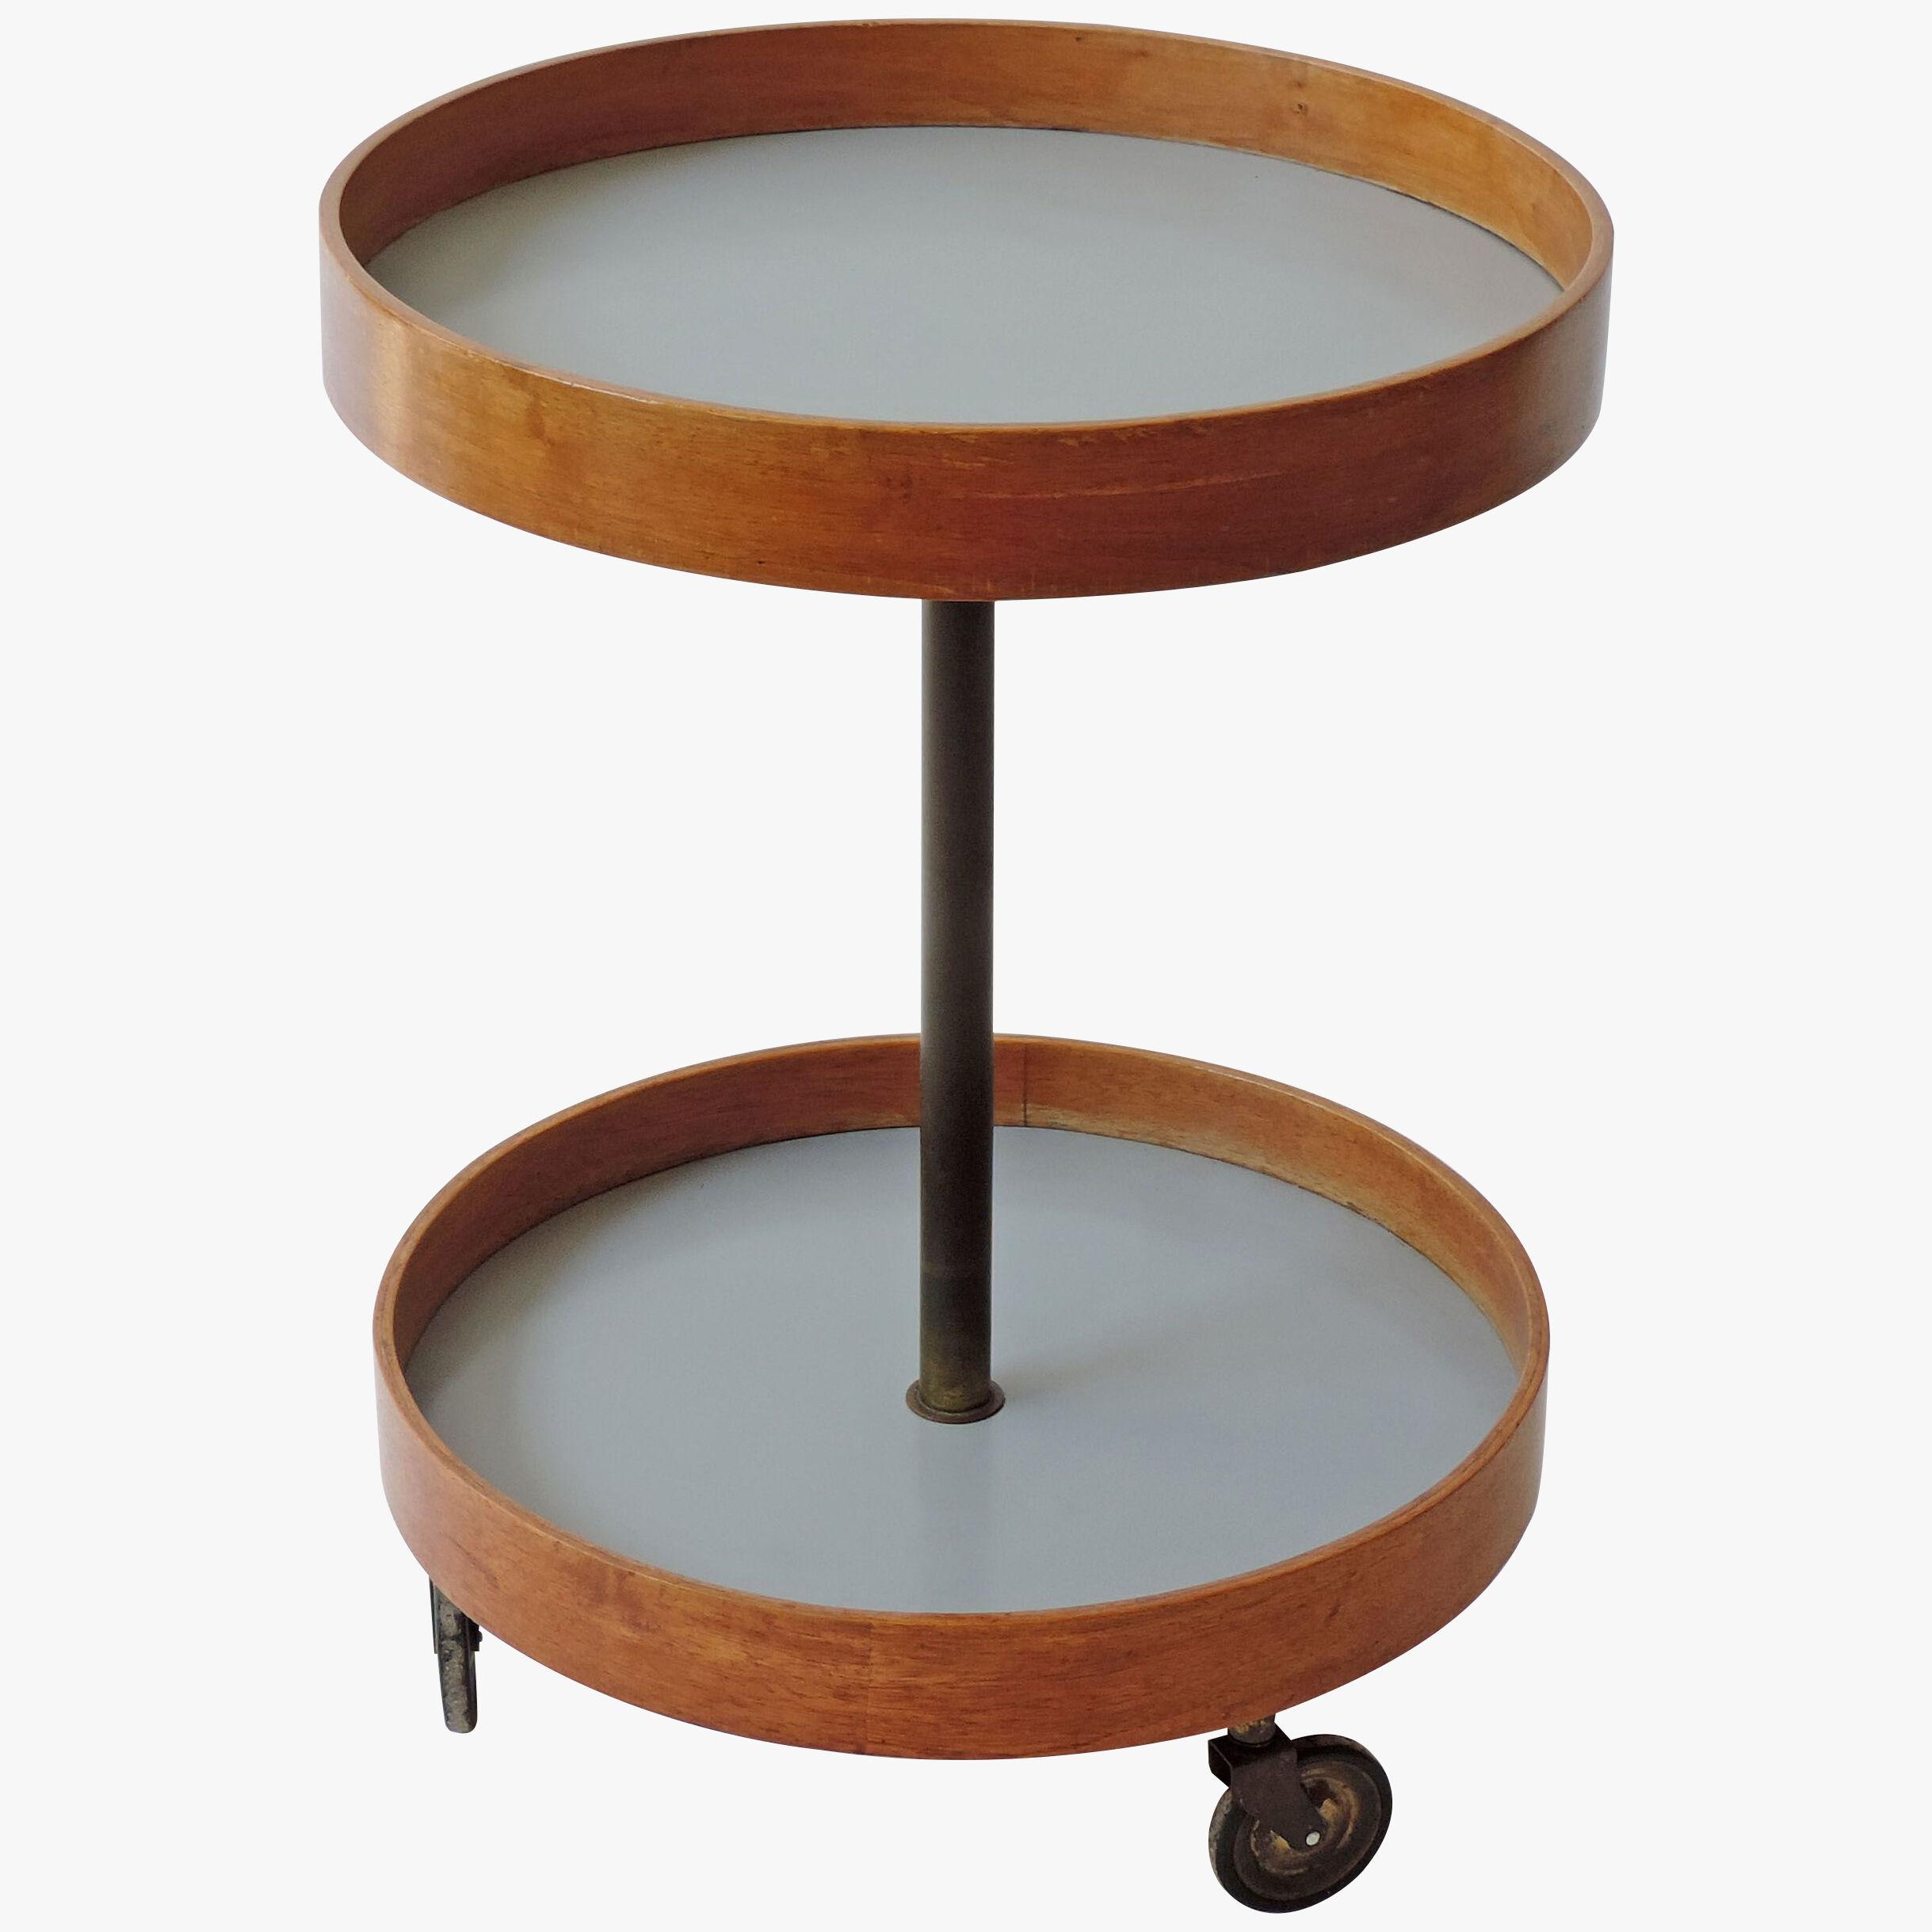 Renato Forti Bar Cart or Work Unit, Italy, 1950s